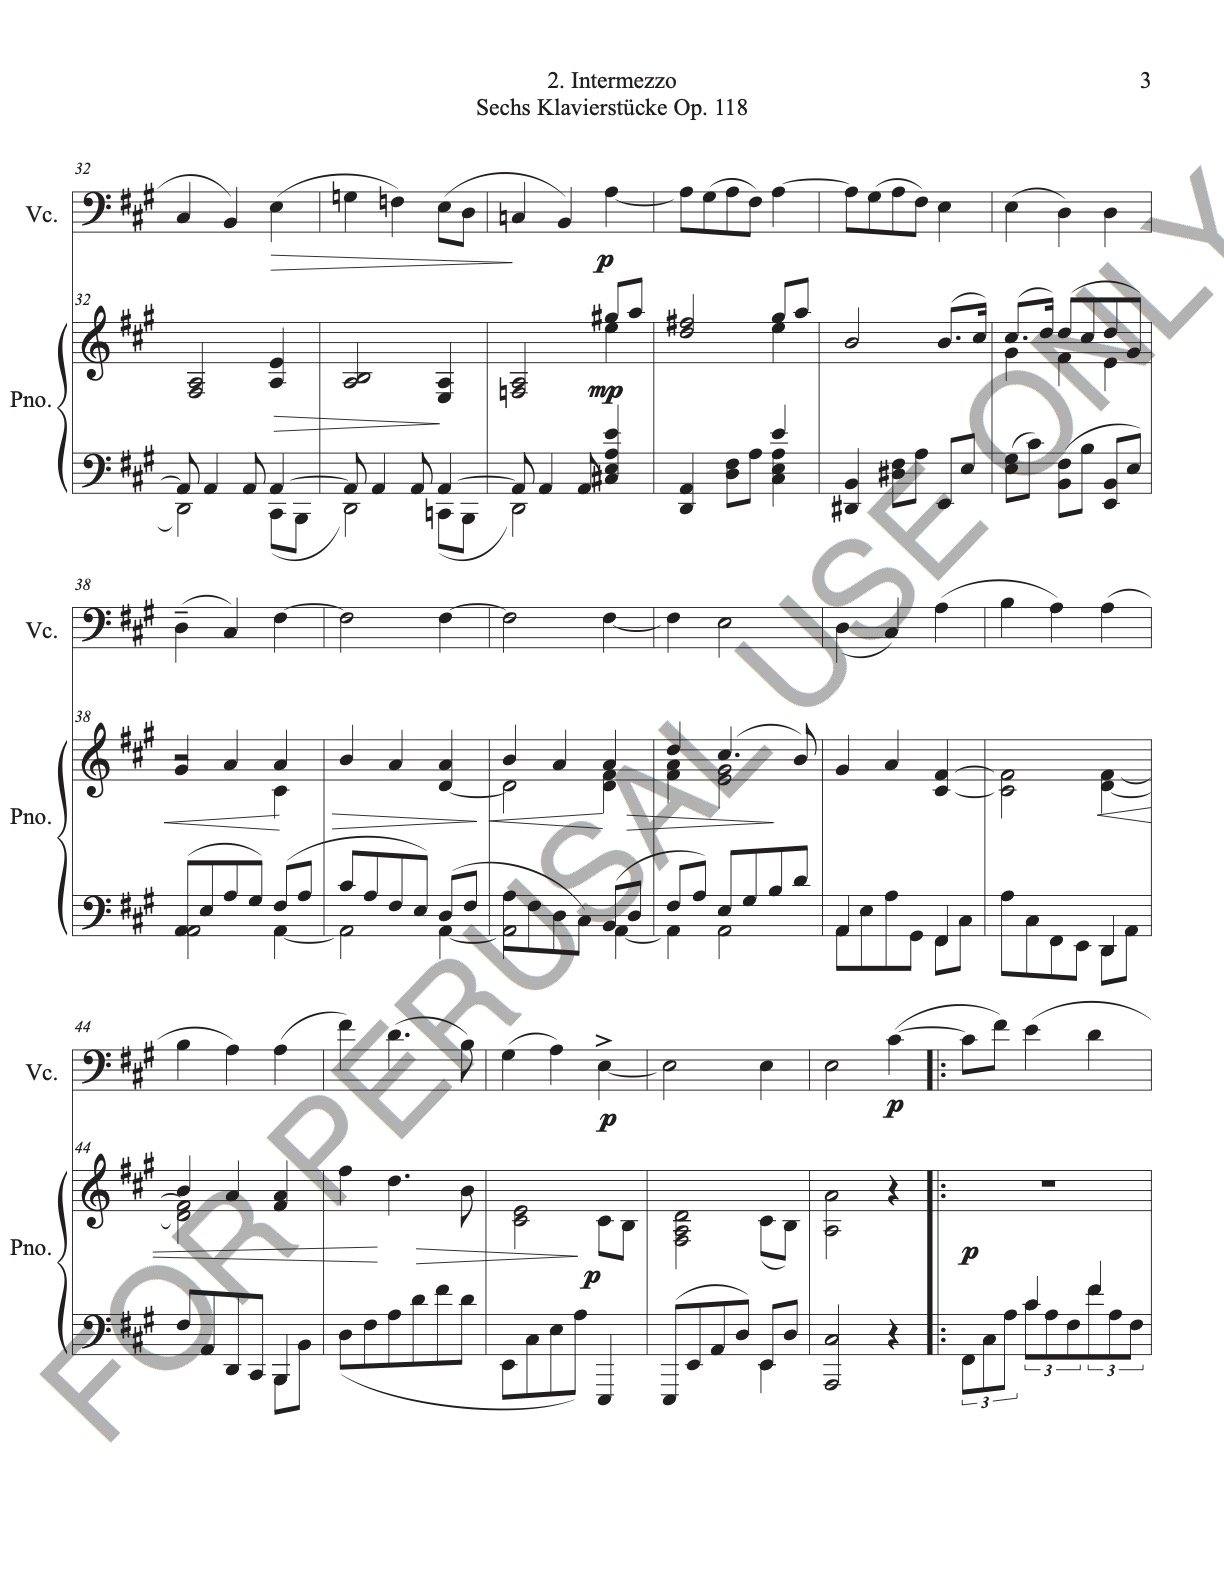 Intermezzo Op. 118 no. 2 by Brahms sheet music for Cello and Piano (score+parts) - ChaipruckMekara